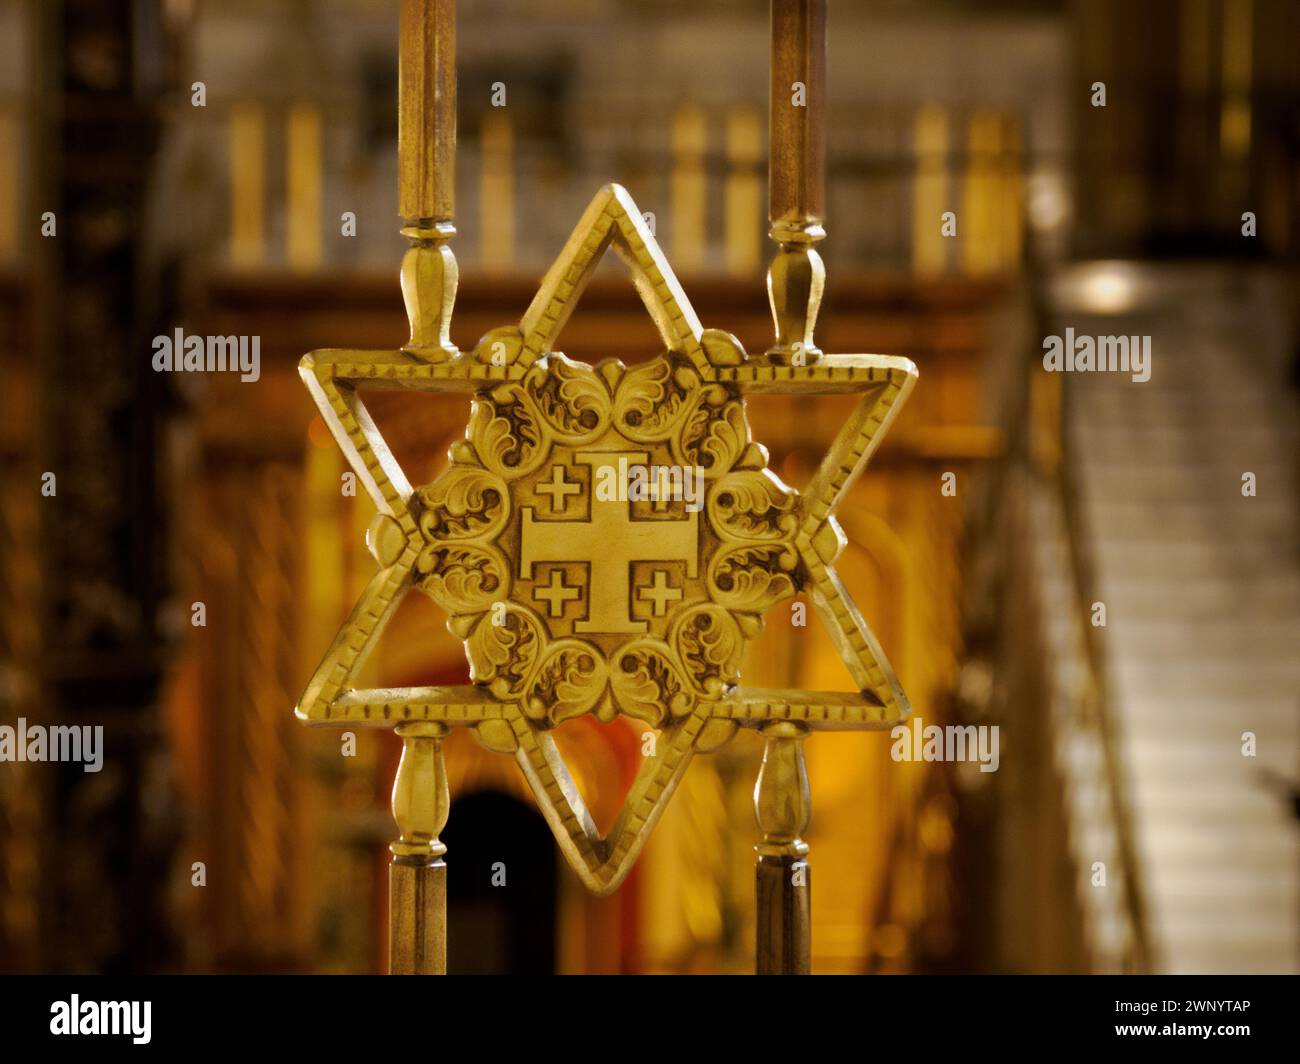 Jerusalem Cross in Star of David, Franciscan Monastery of the Holy Land in America, Washington DC, USA Stock Photo